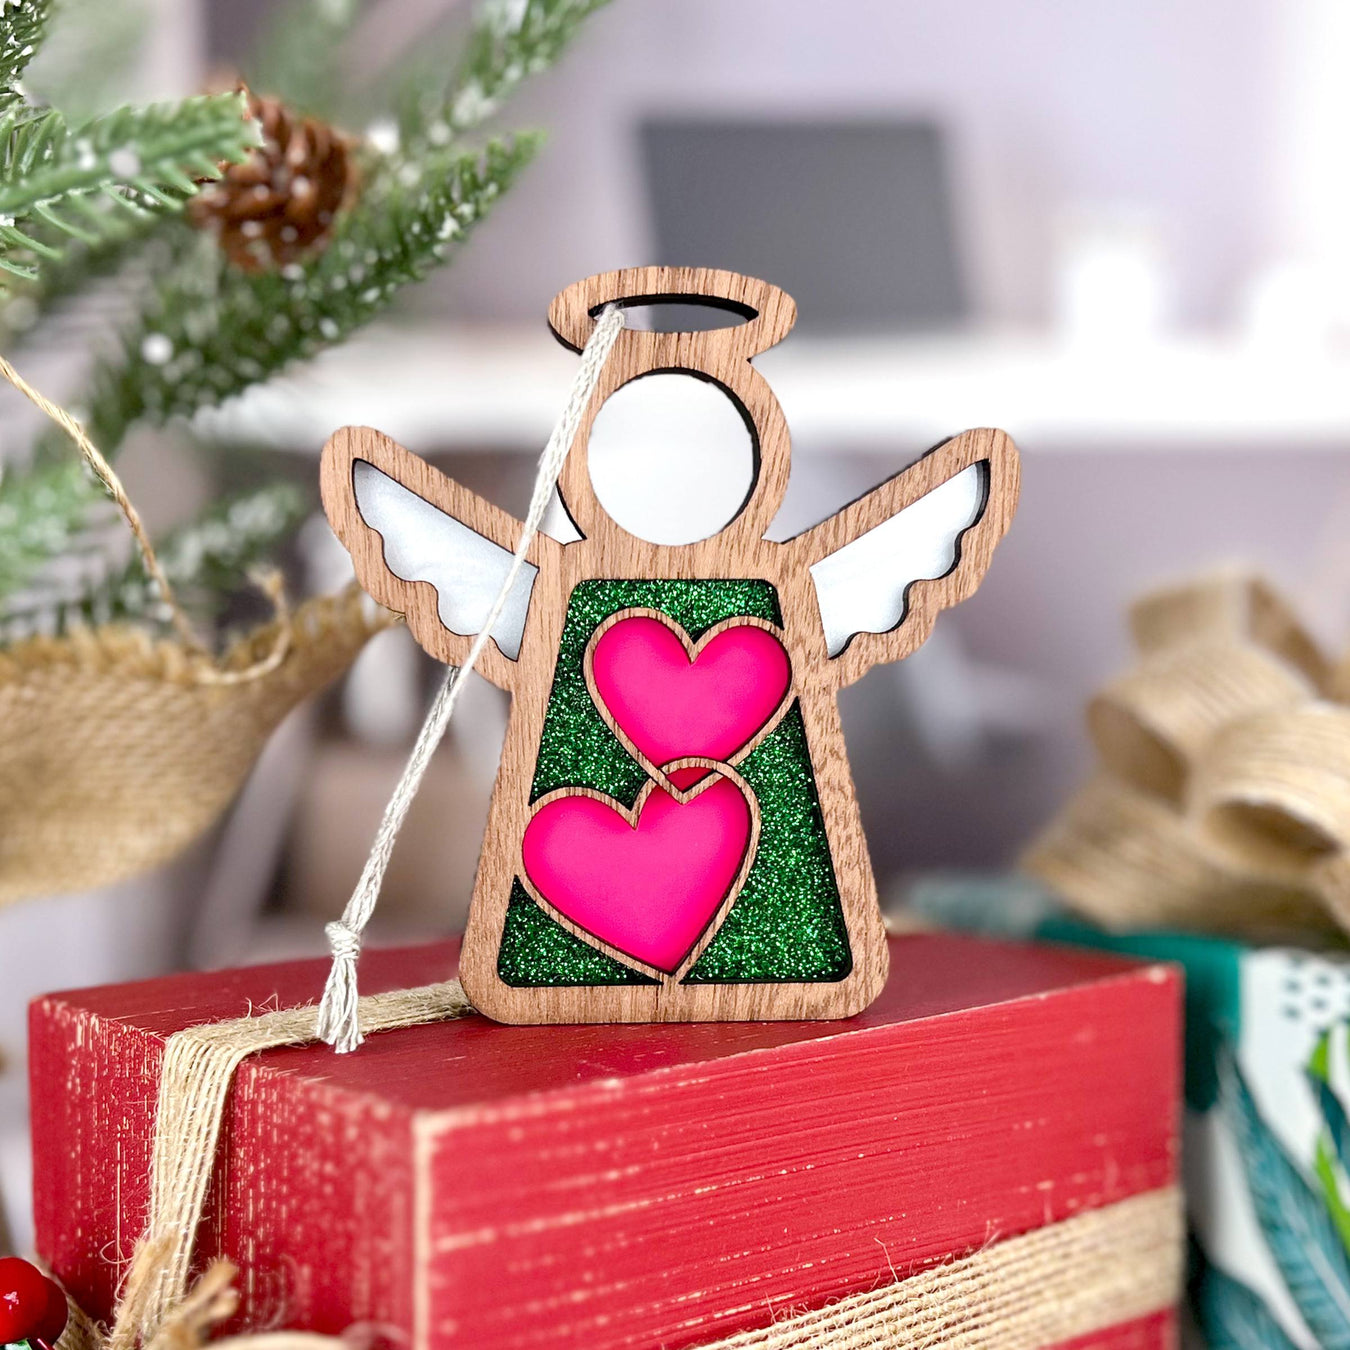 A Forged Flare® Christmas angel ornament with vibrant pink hearts, a charming Christmas present idea among other festive Christmas gifts.